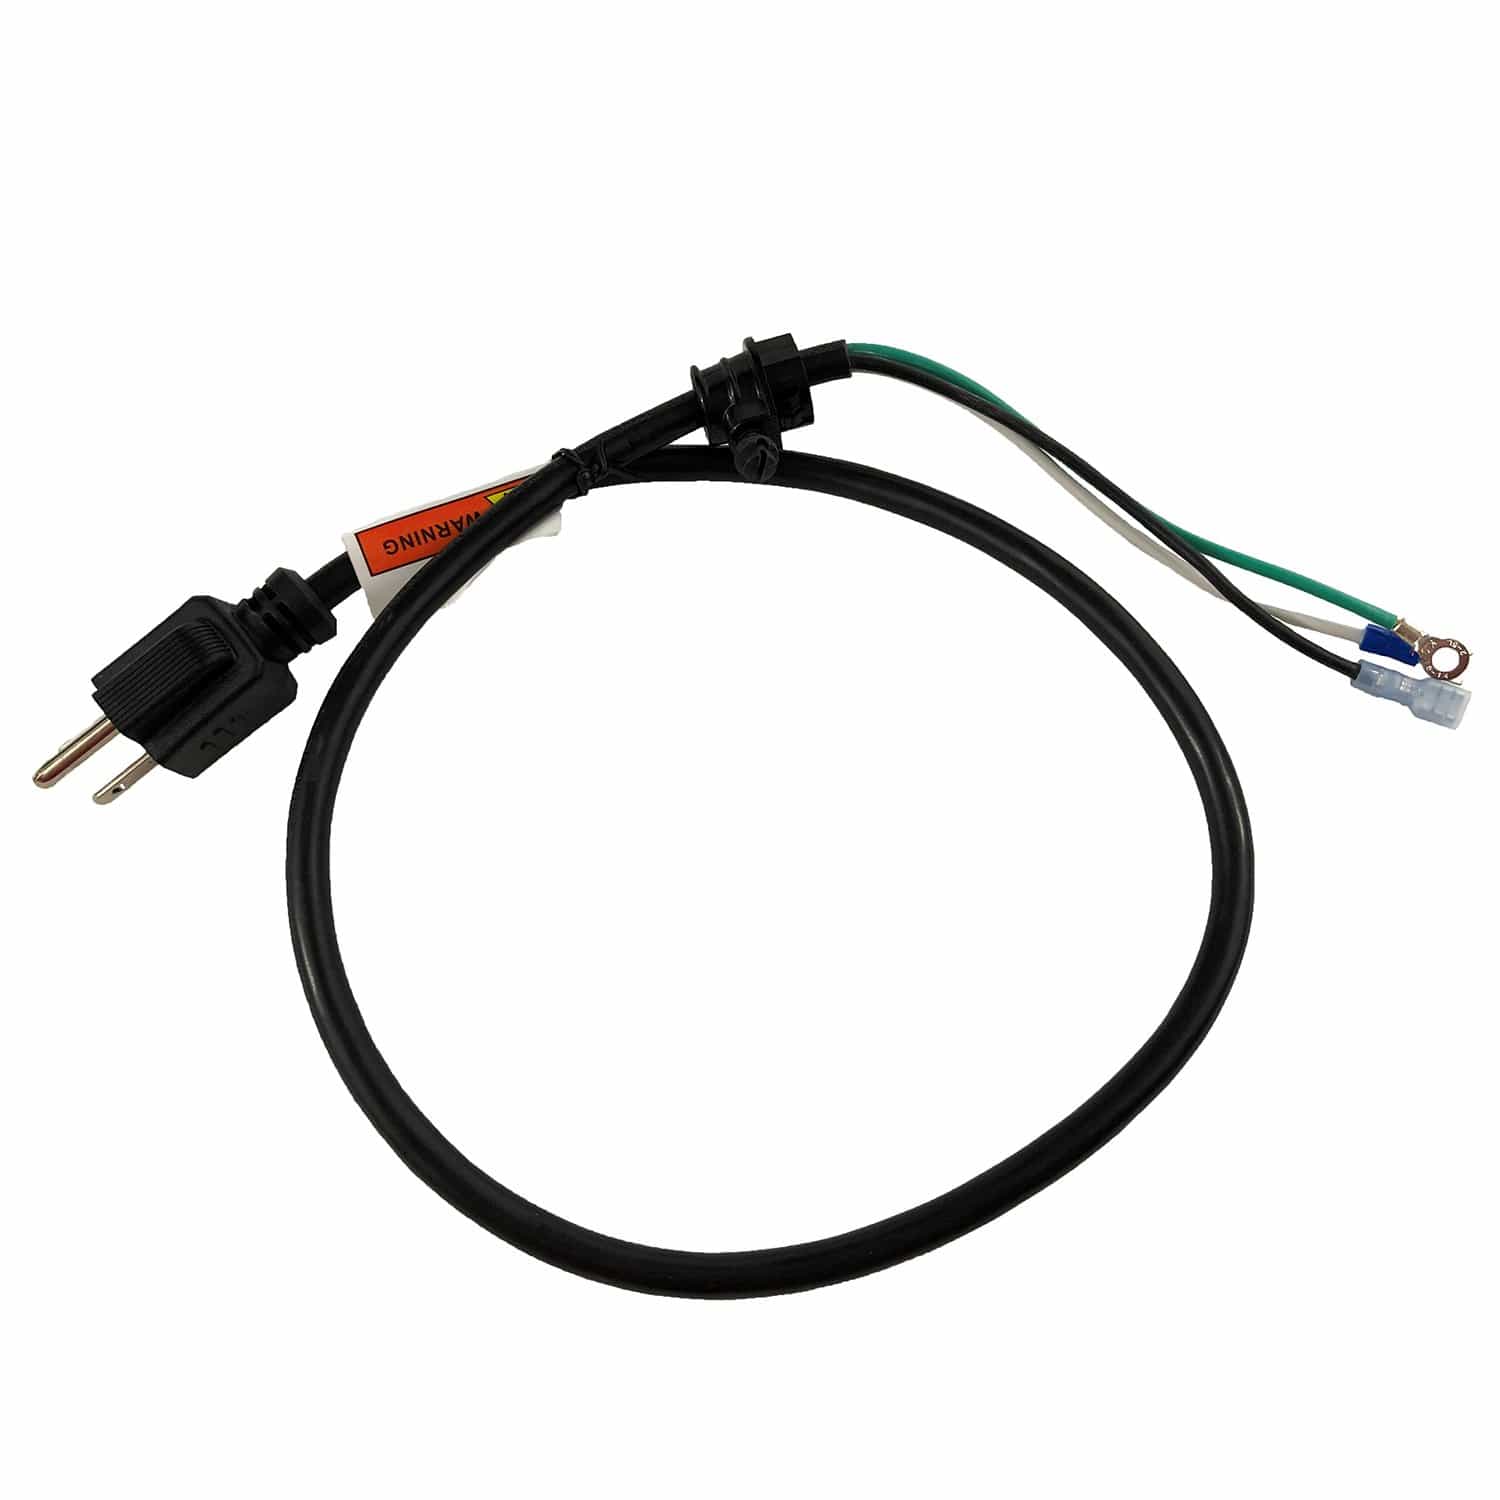 Dometic 92107 Power Cord Service Kit